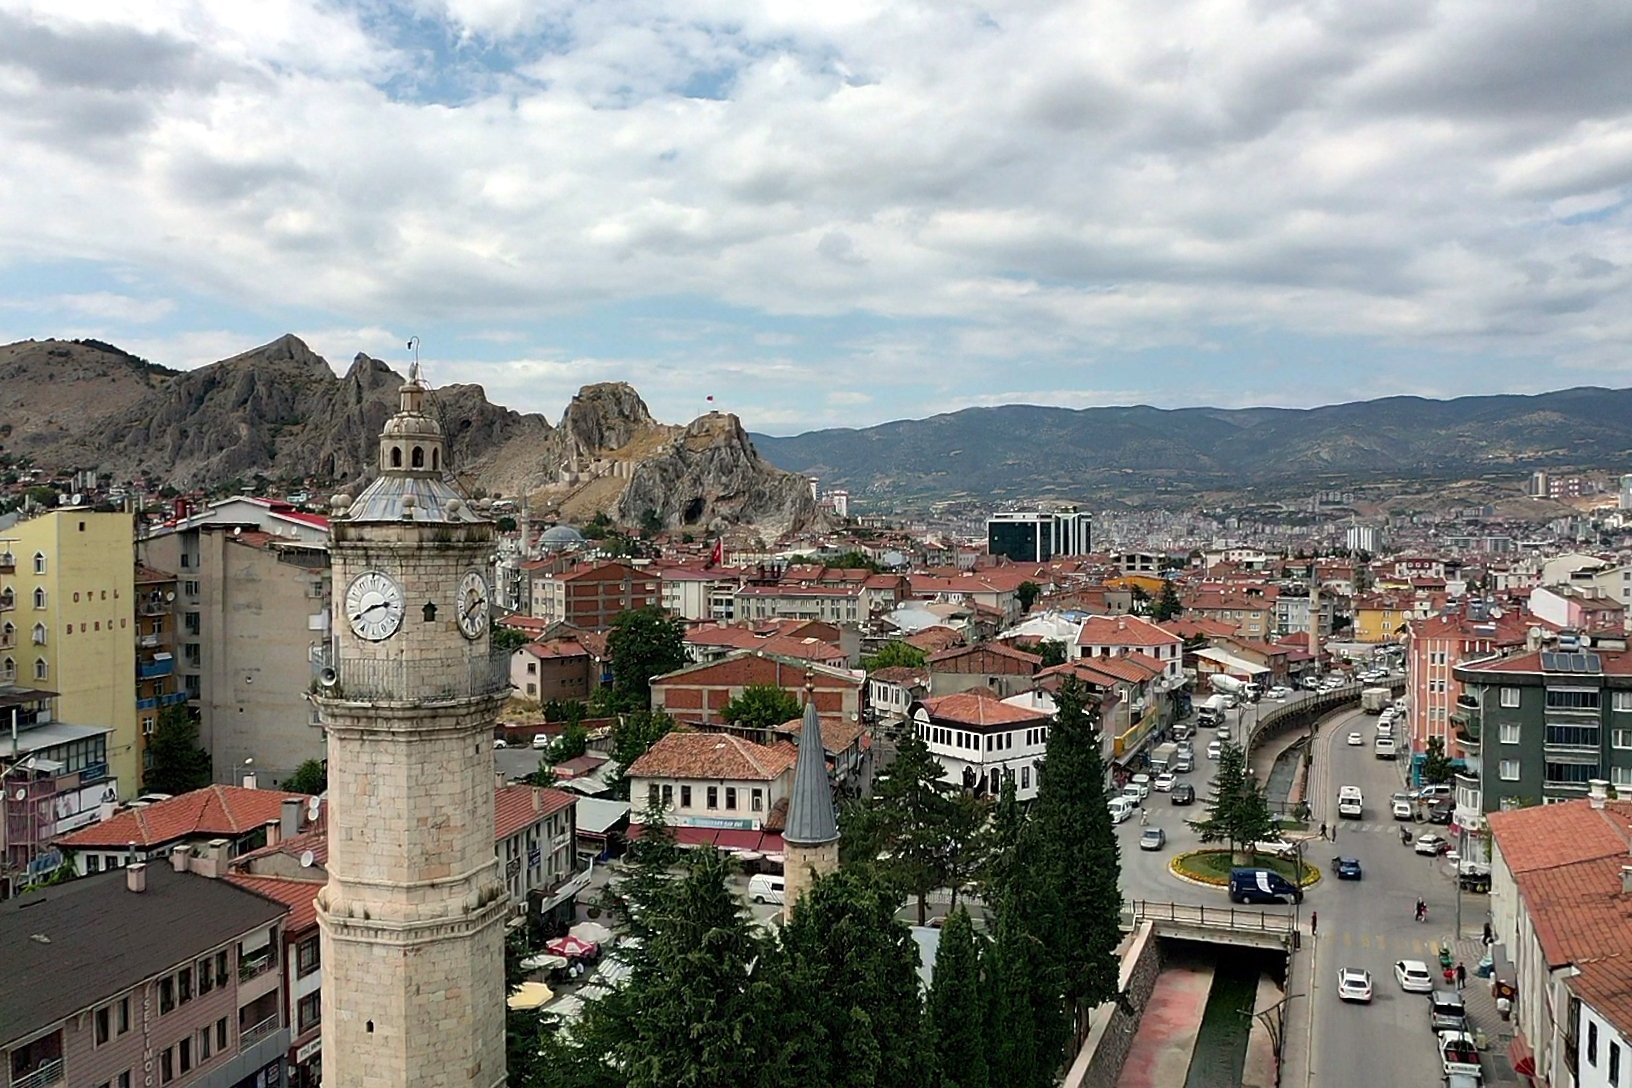 The clock tower in northern Tokat province can be seen from all parts of the city, Turkey, Aug. 24, 2020. (AA Photo)